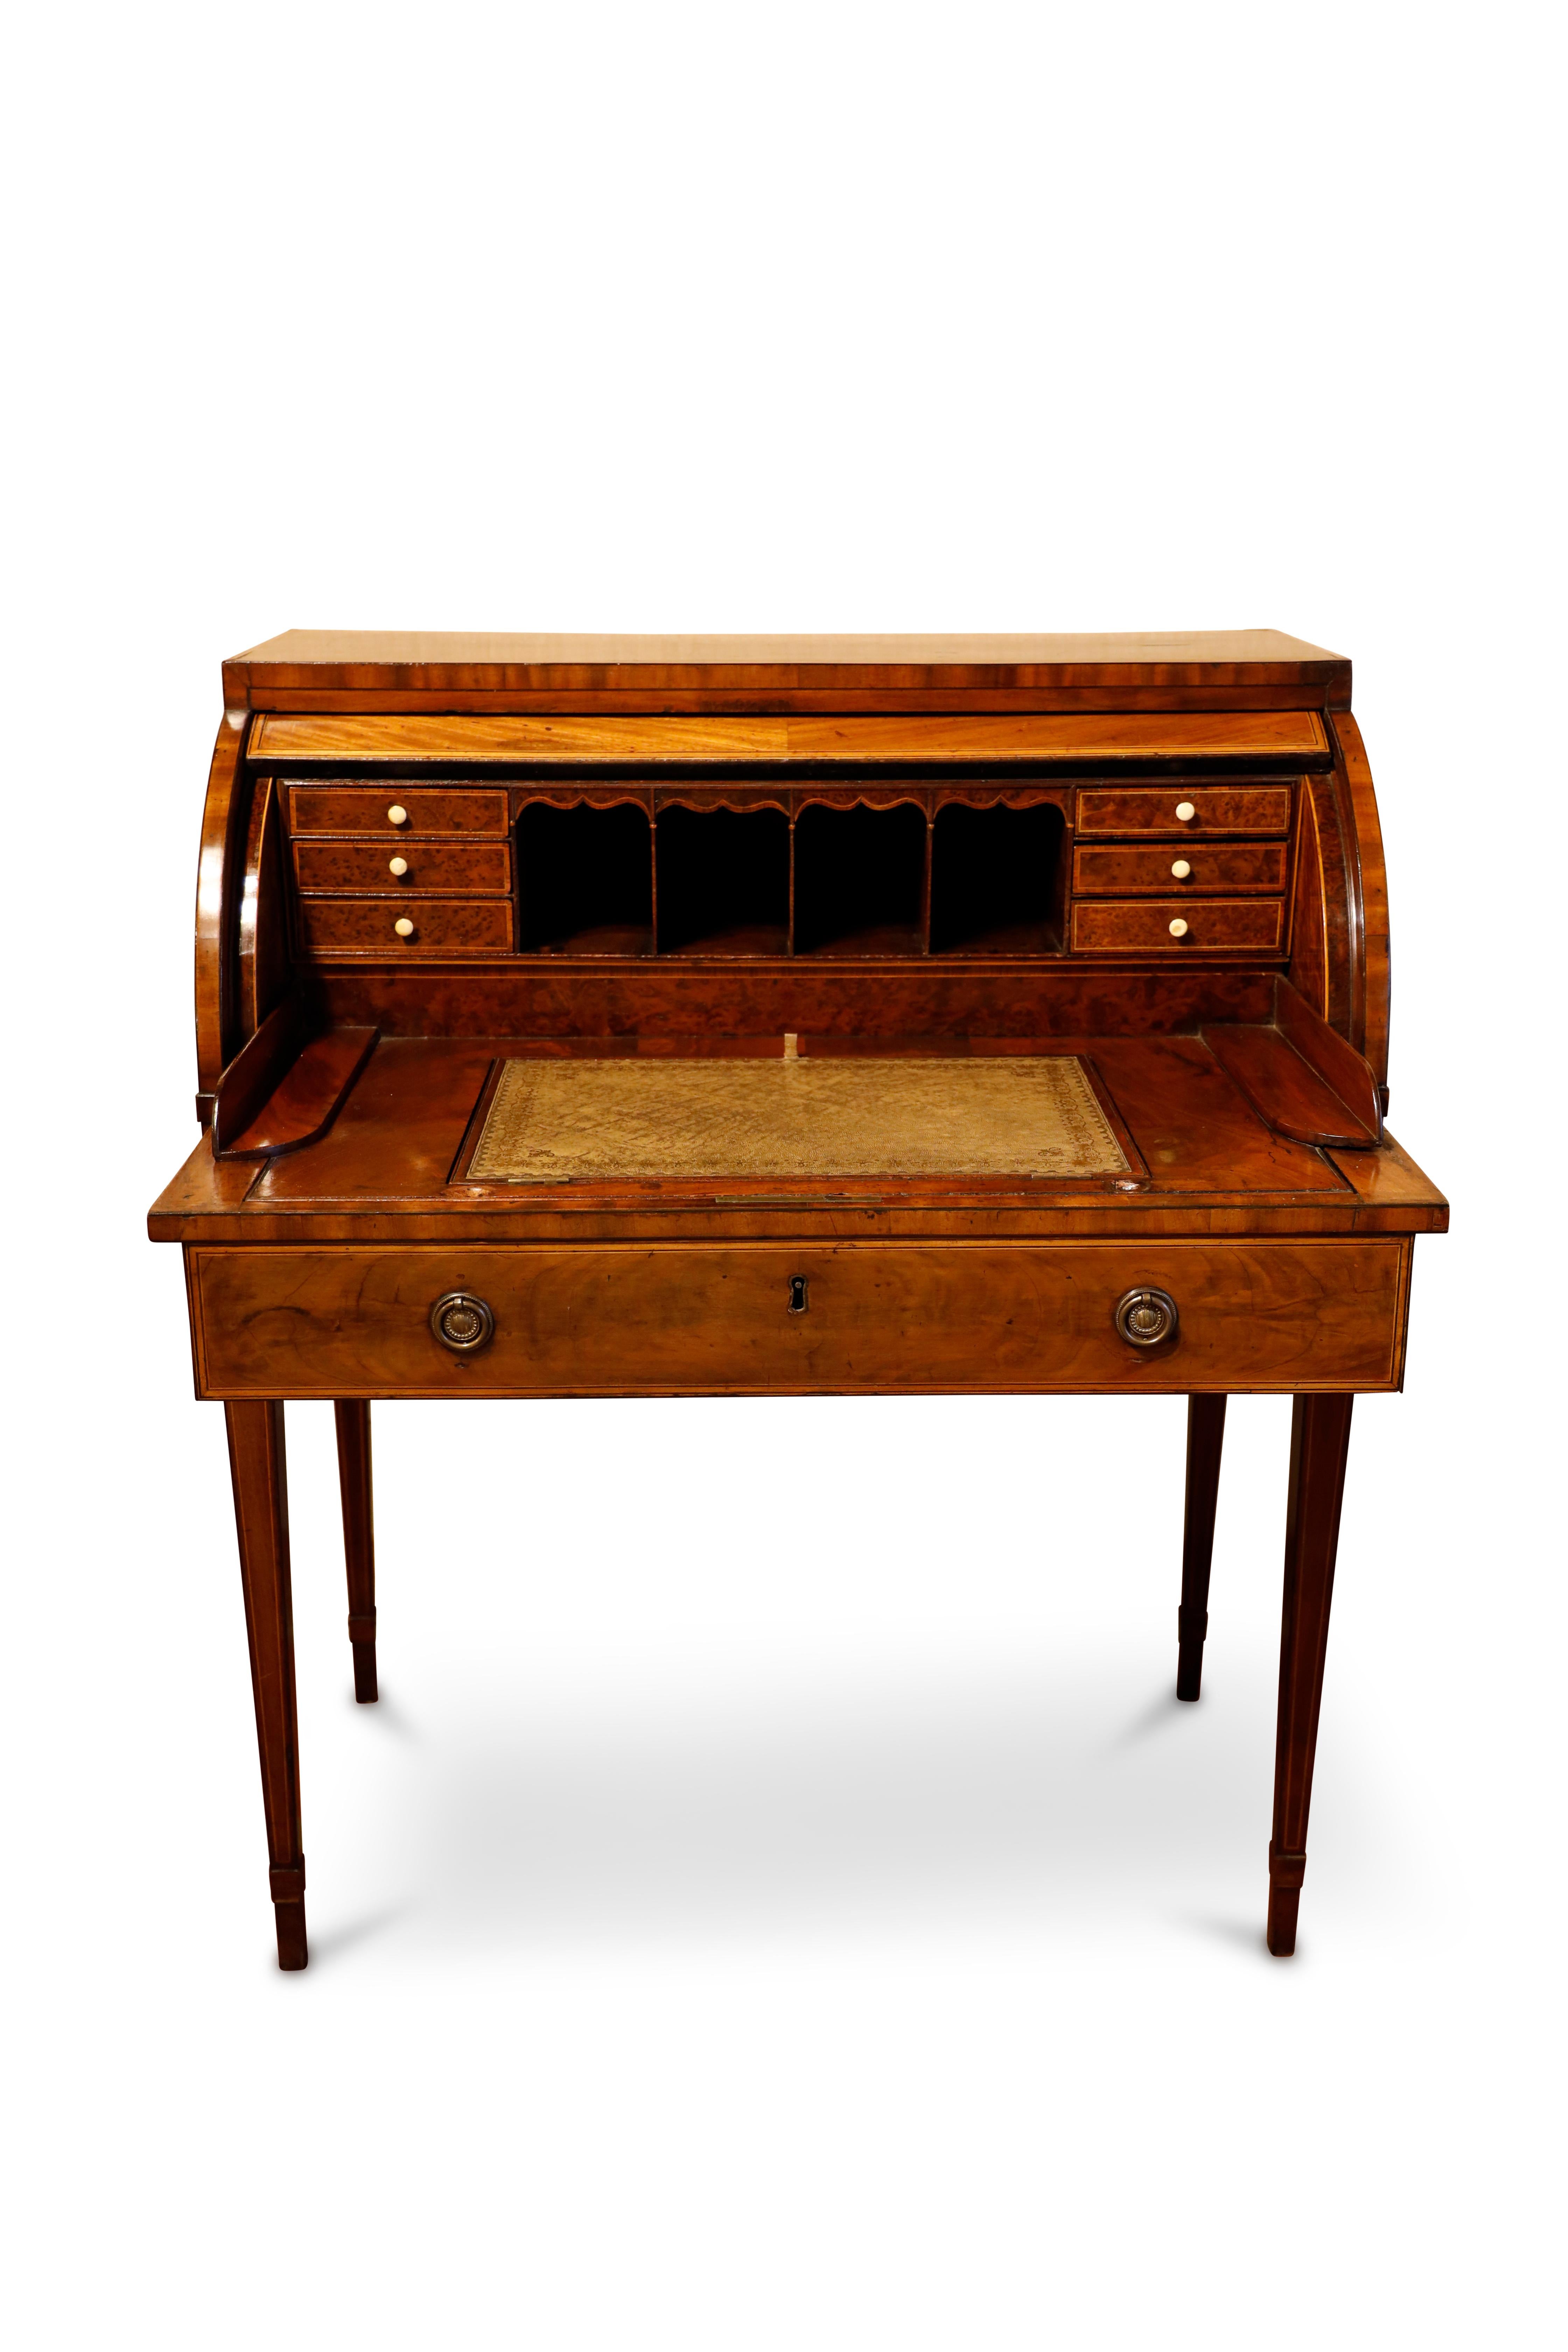 Scottish George III mahogany and sycamore banded cylinder bureau / desk.  The revolving cover encloses a leather inset, articulating writing surface and an arrangement of pigeon holes and burl yew fronted small drawers. Boxwood inlay thoughout case